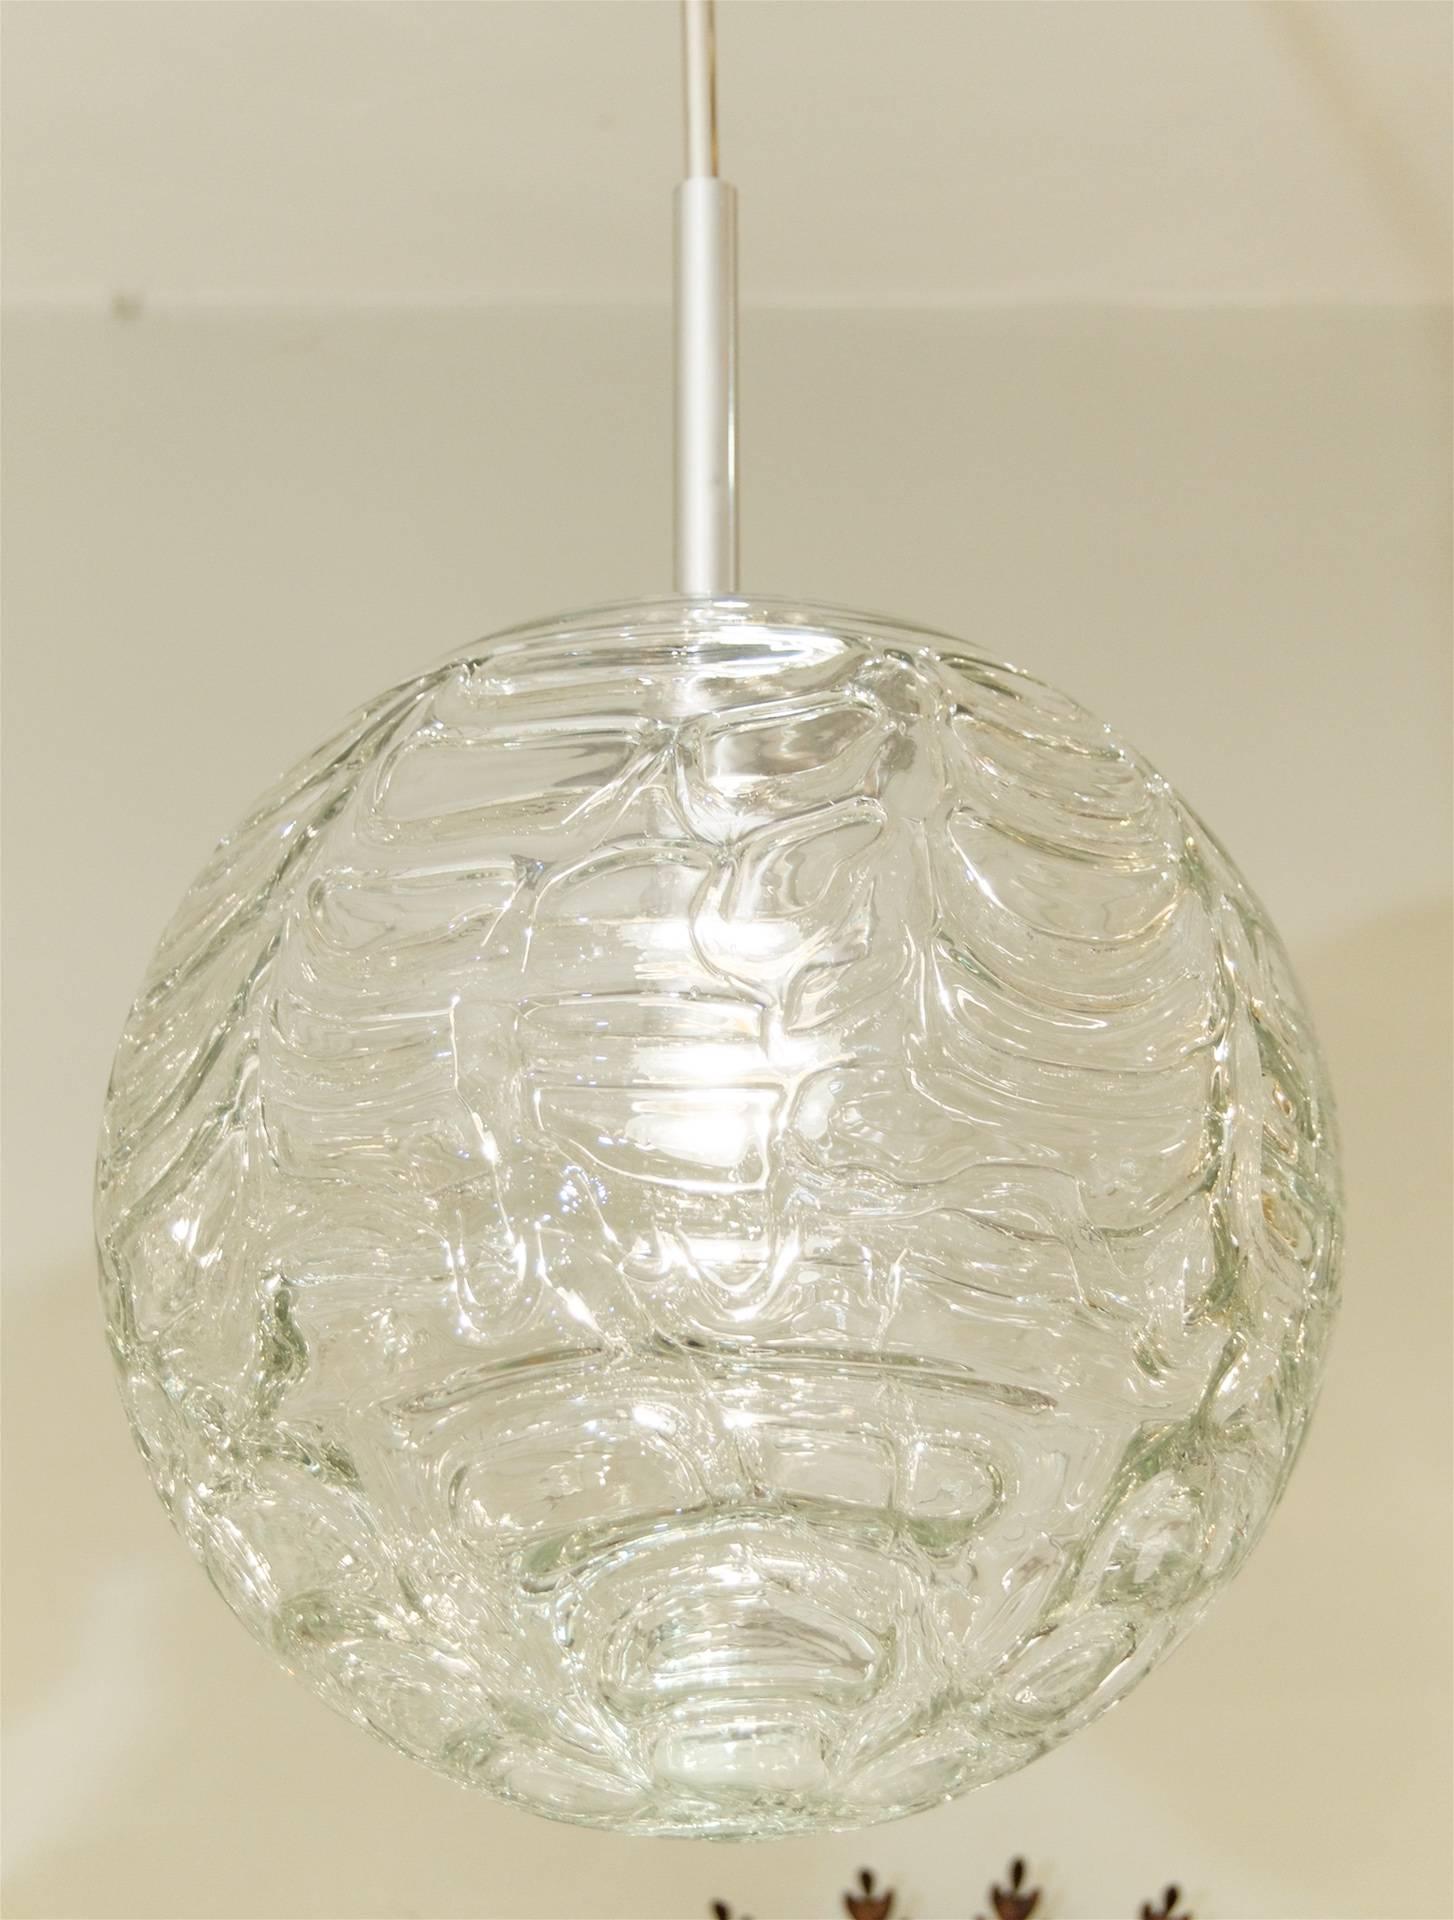 Fantastic Doria pendant will complement all decors. Heavy textured wave surface of clear glass.

Takes a single medium base bulb up to 100 watts, new wiring. Length of drop rod can be adjusted. Height as currently hung is 28